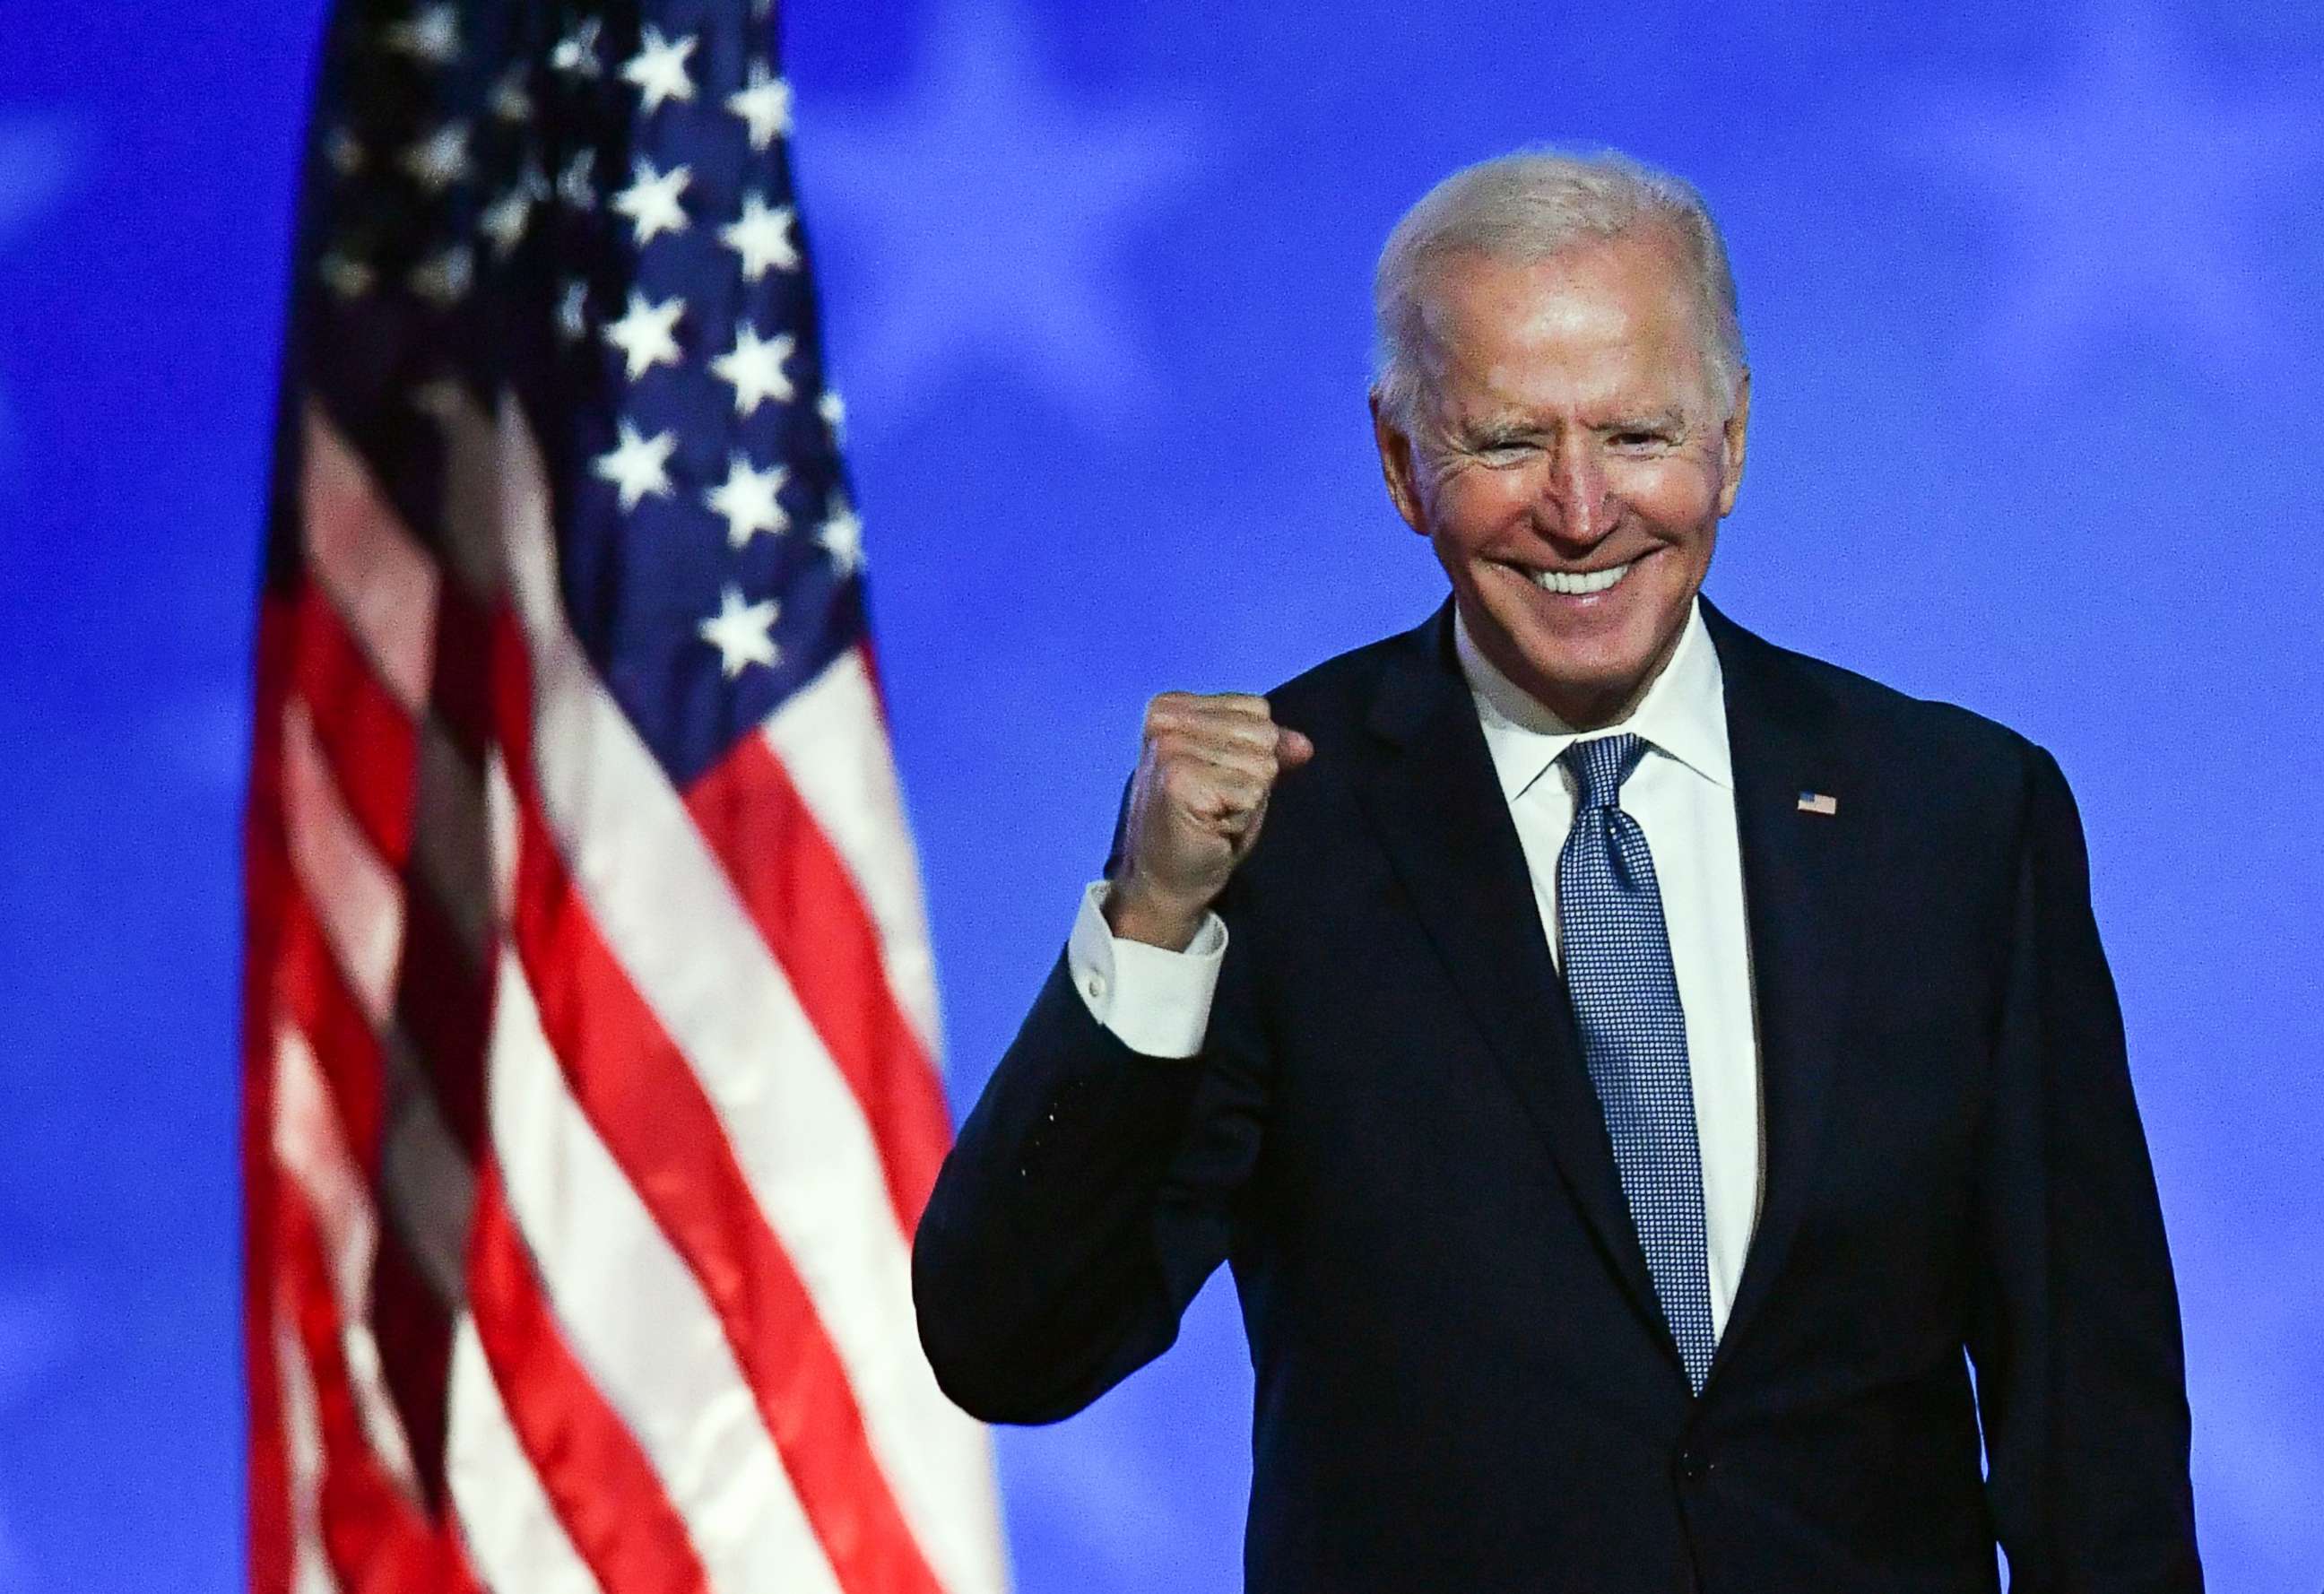 PHOTO: Democratic presidential nominee Joe Biden gestures after speaking during election night at the Chase Center in Wilmington, Del., early on Nov. 4, 2020.